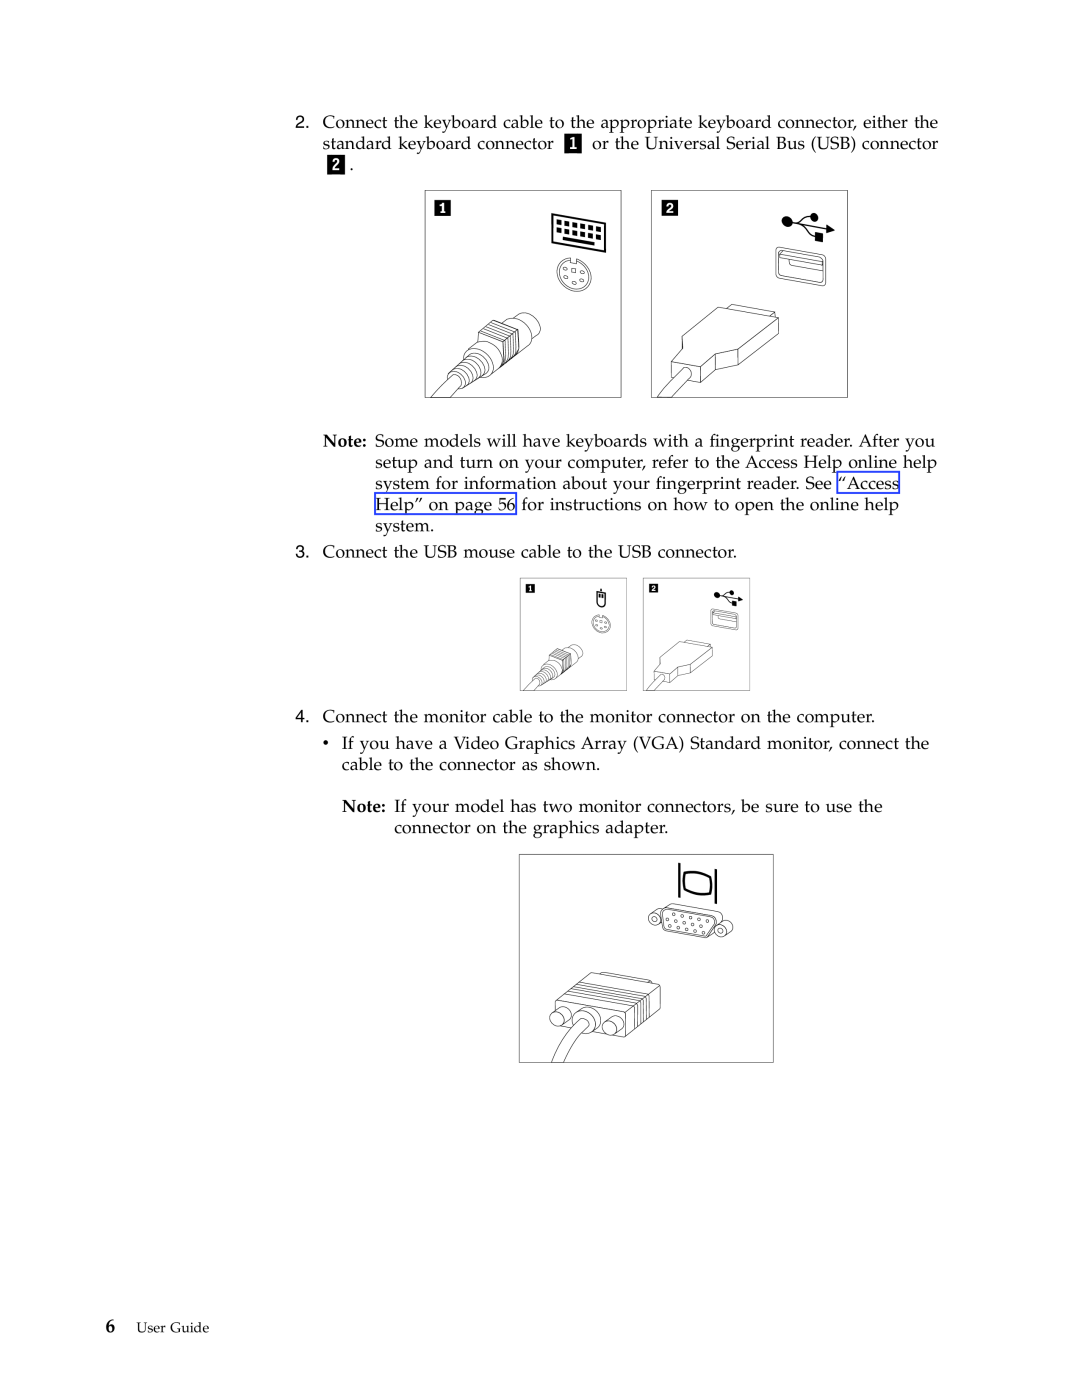 Lenovo 6019 manual Connect the USB mouse cable to the USB connector 